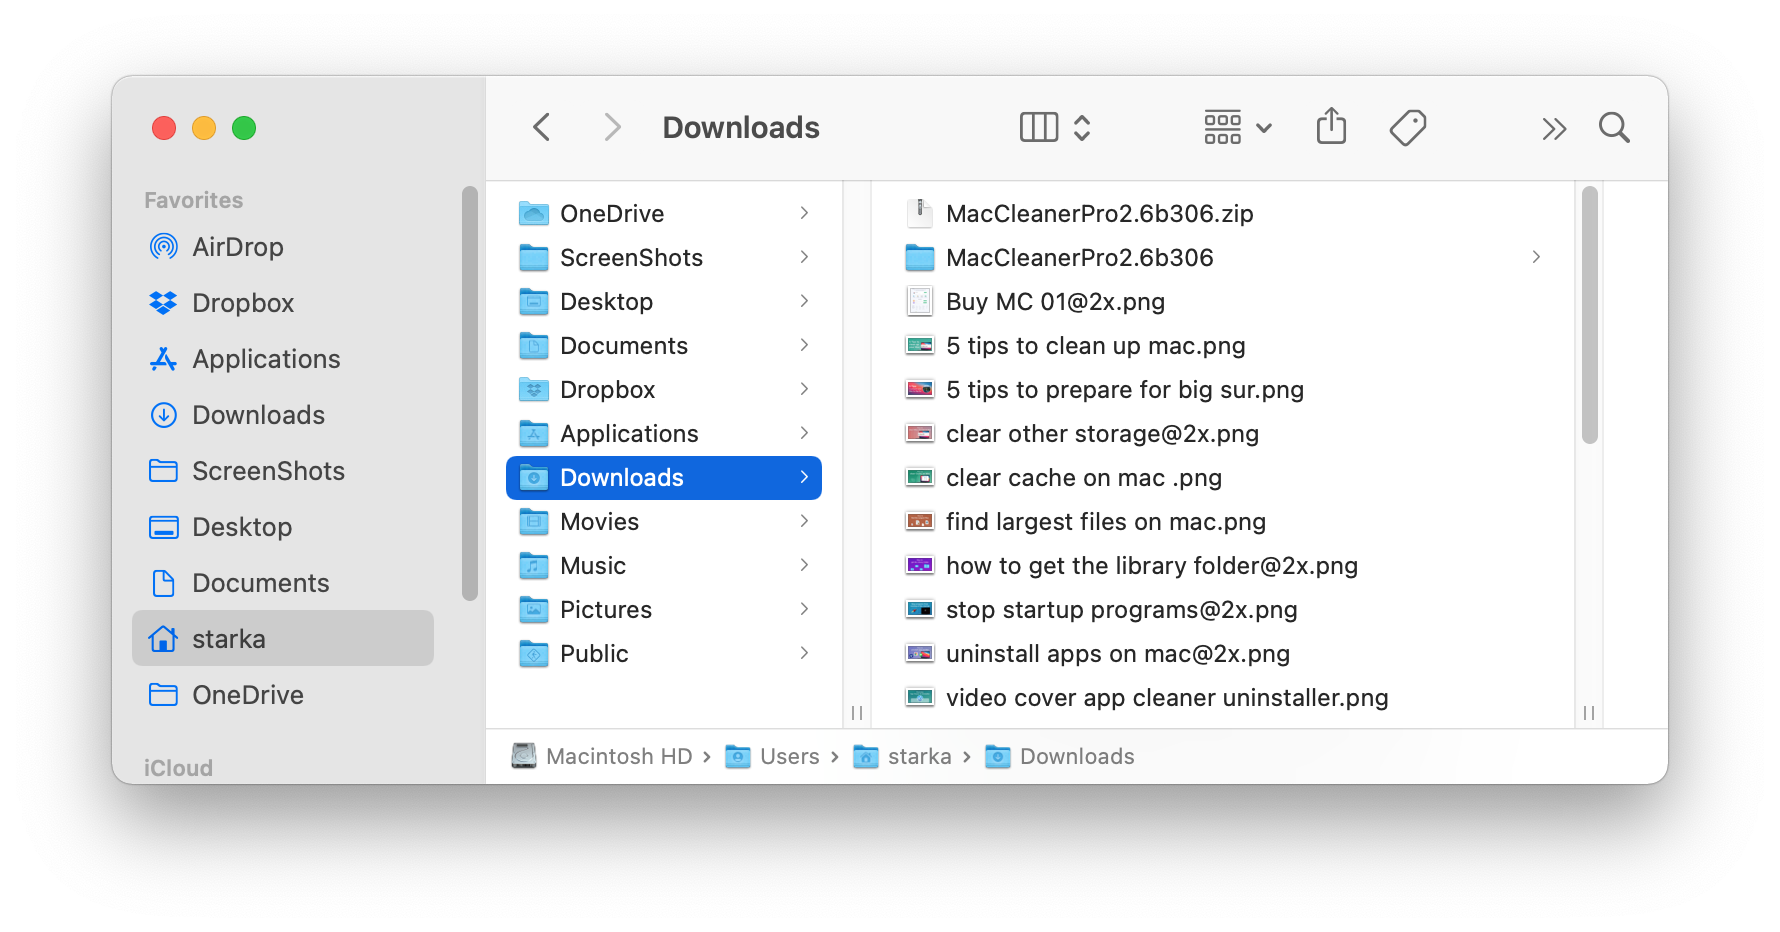 Clear Downloads to make space on Mac